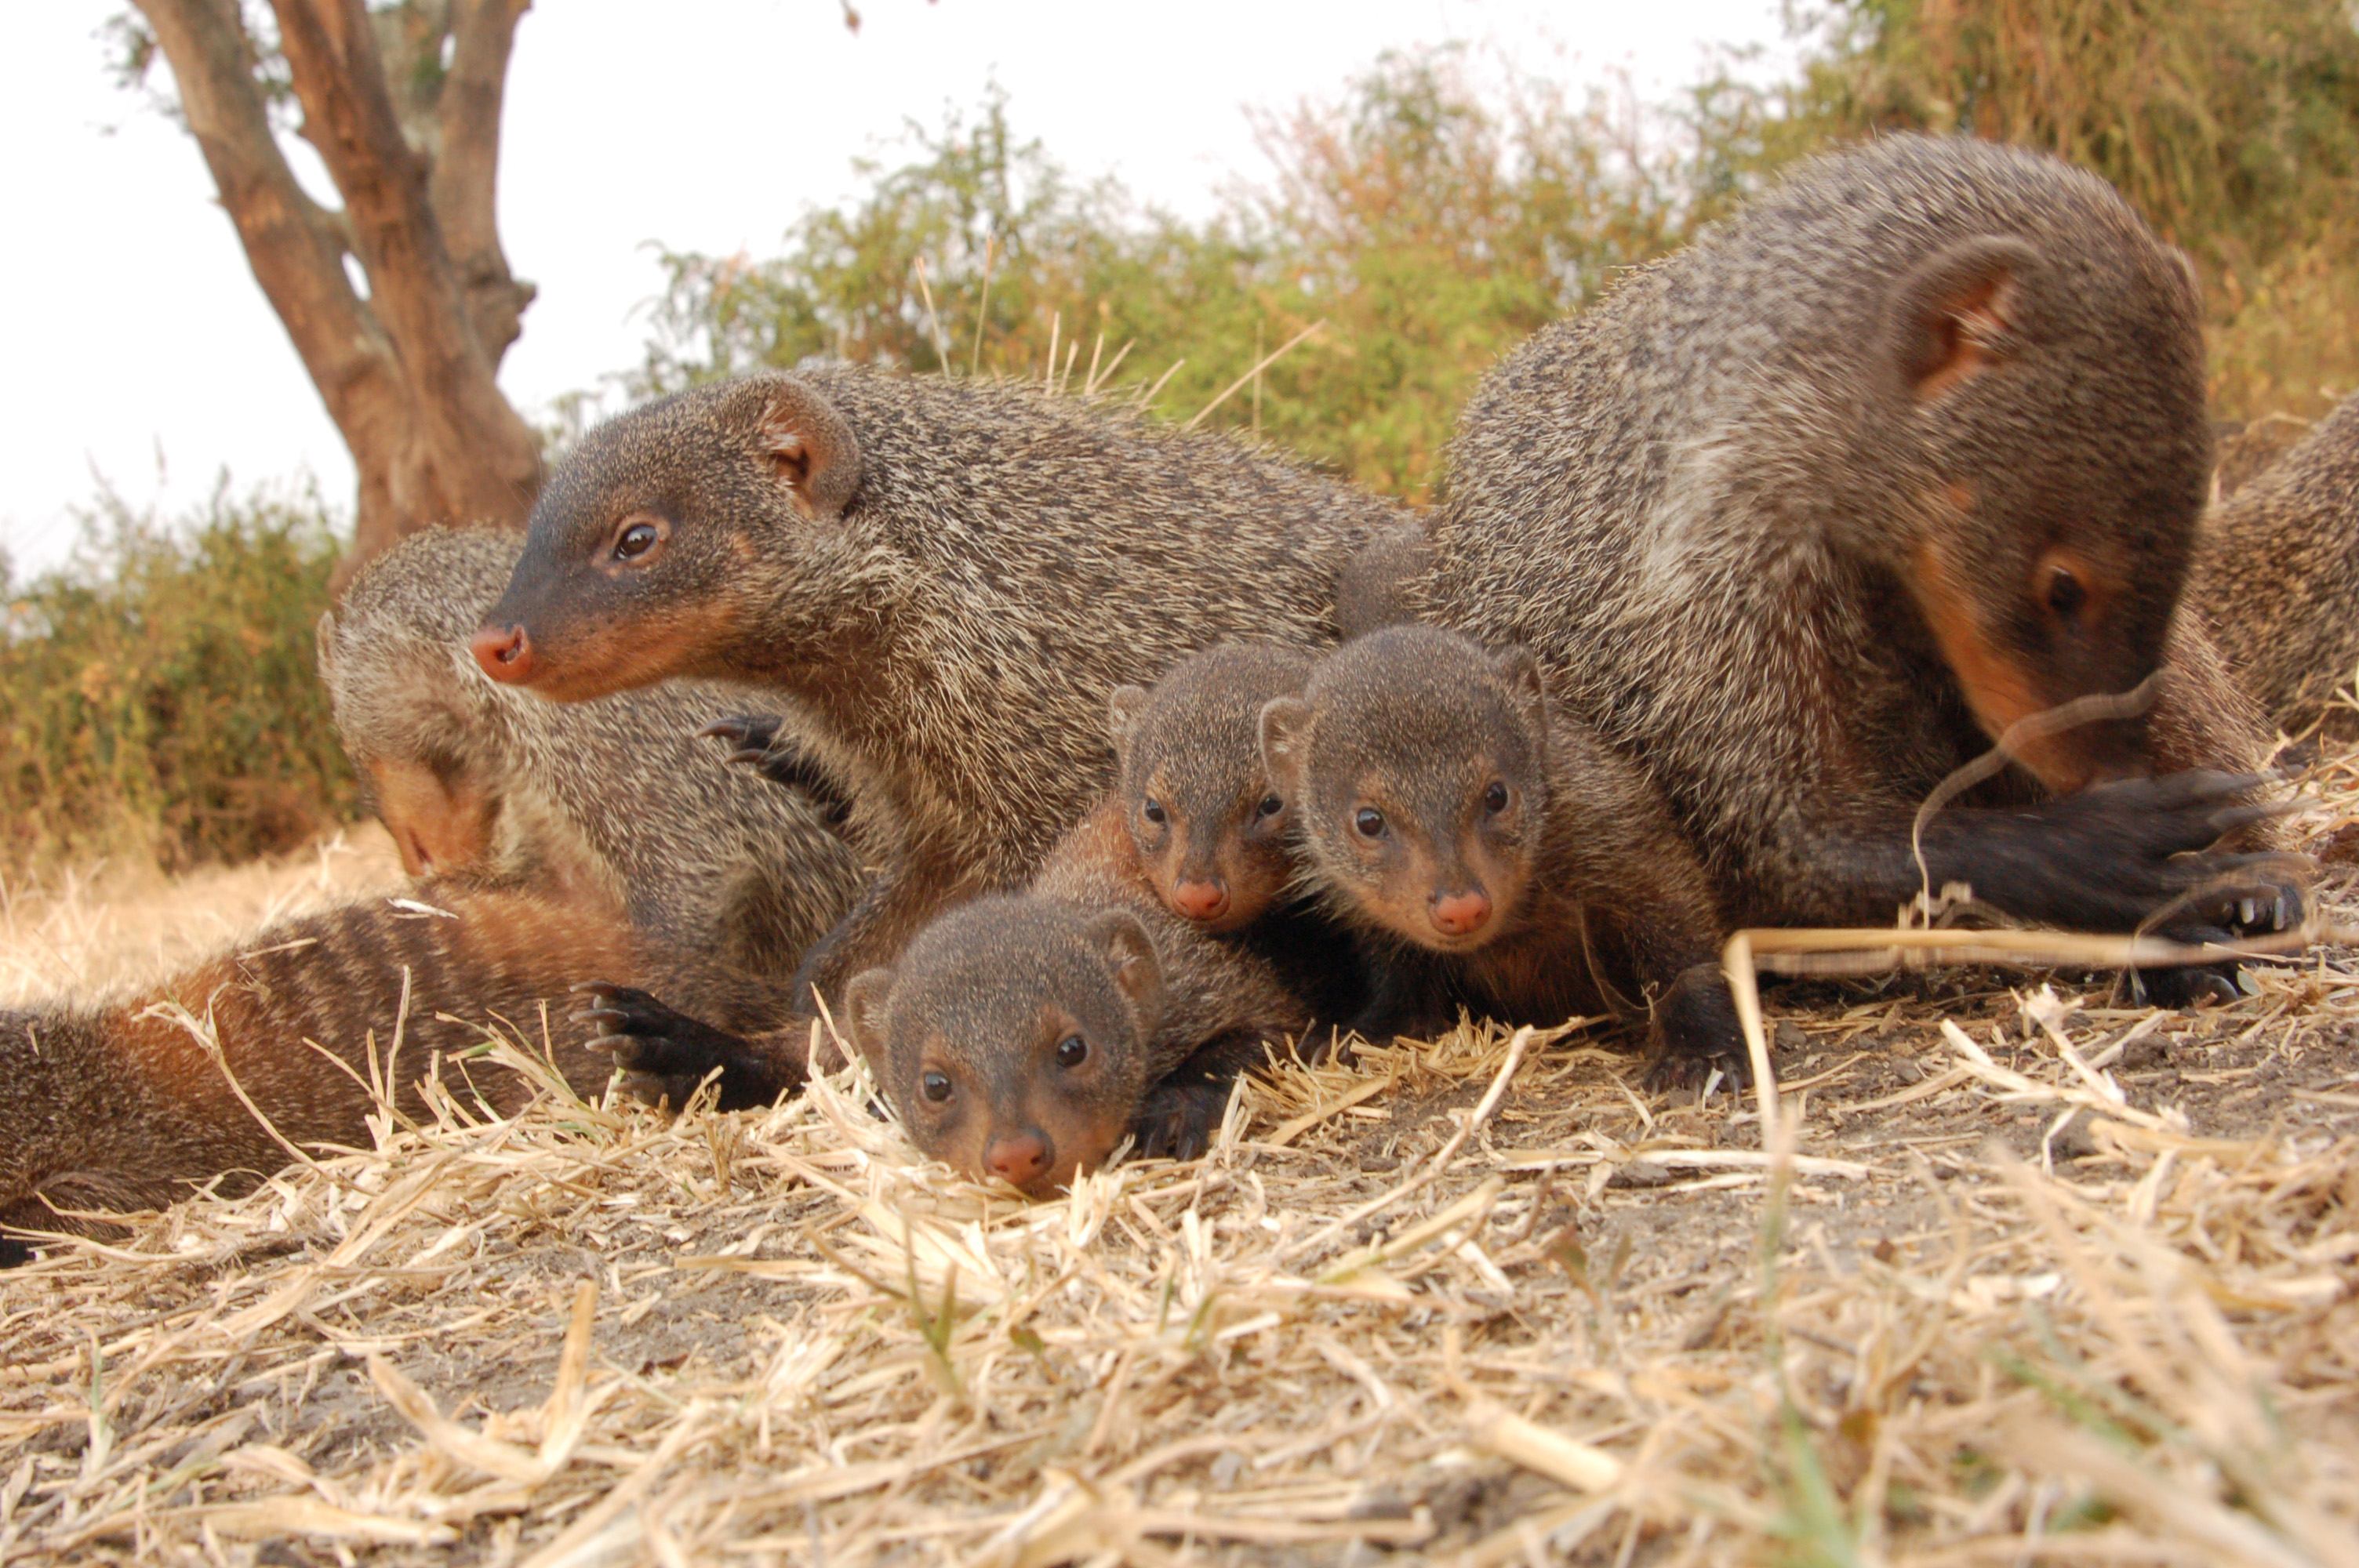 Image - Mongooses who are cared for at an early age have lifelong fitness benefits